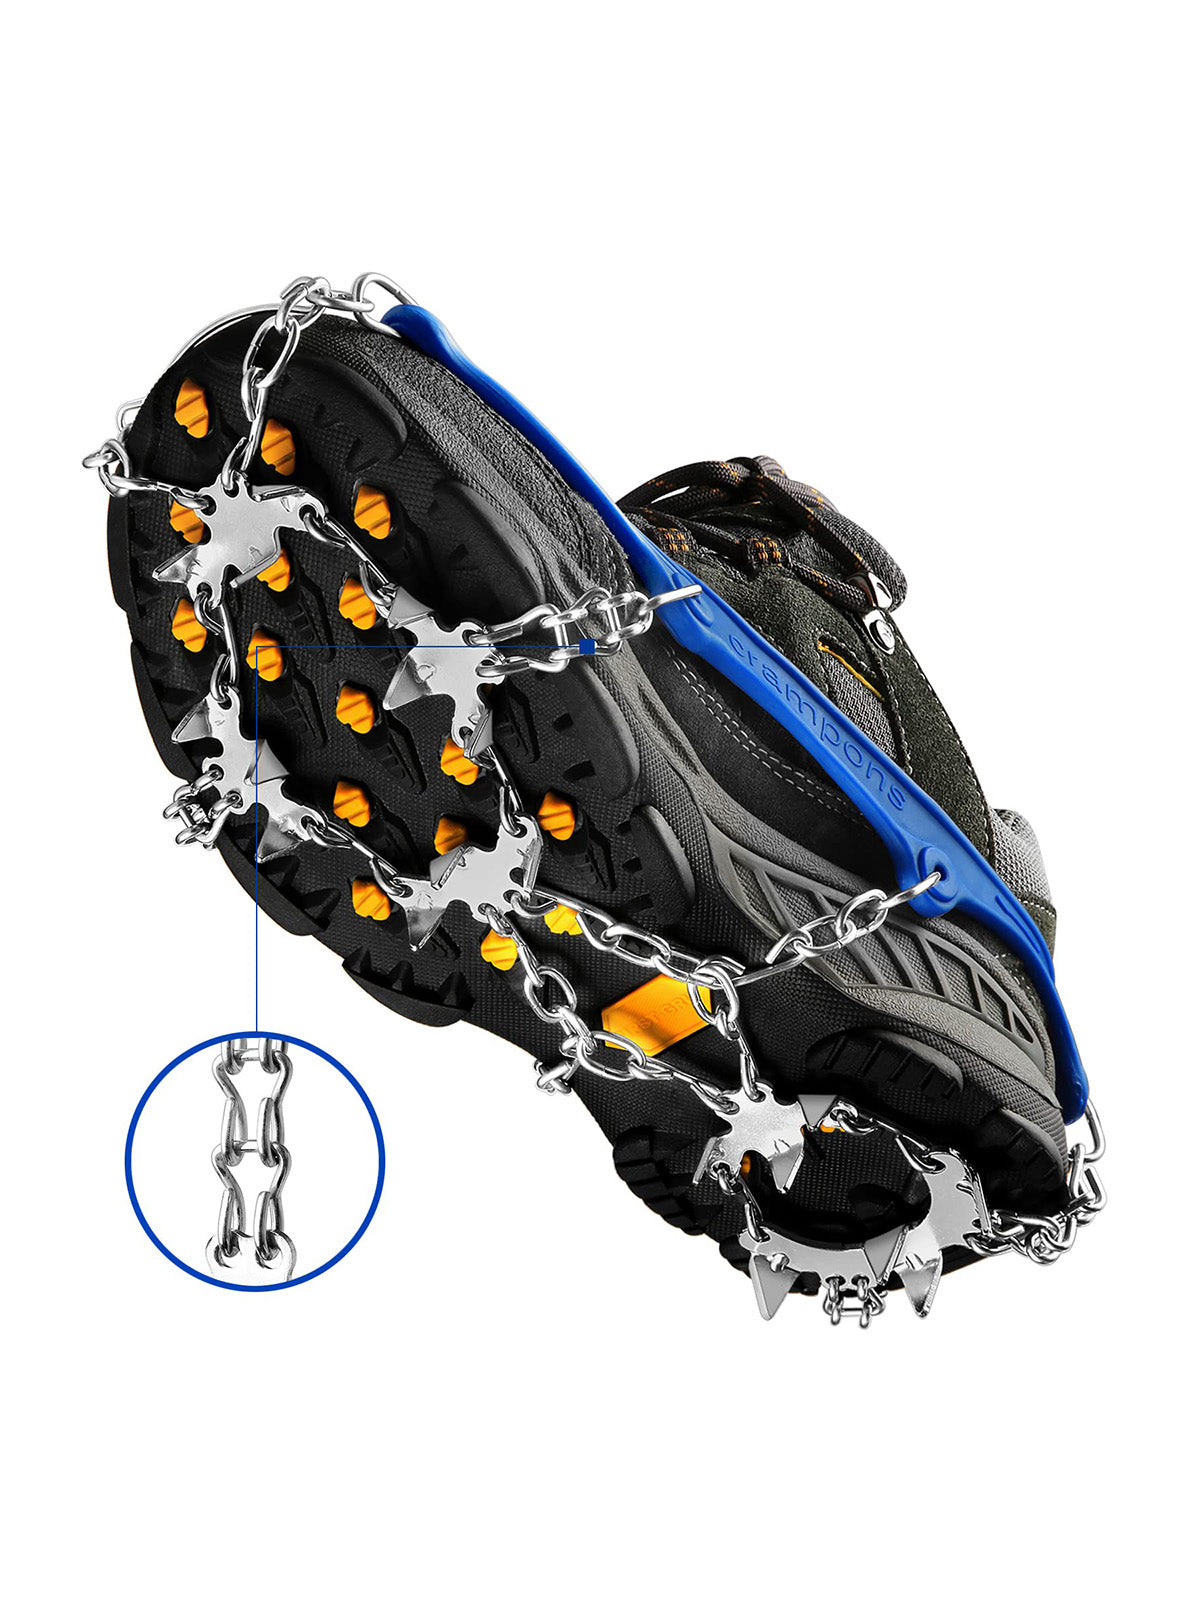 Cimkiz Crampons Ice Cleats Traction Snow Grips For Boots Shoes Women Men Kids Anti Slip 19 Stainless Steel Spikes Safe Protect For Hiking Fishing Wal